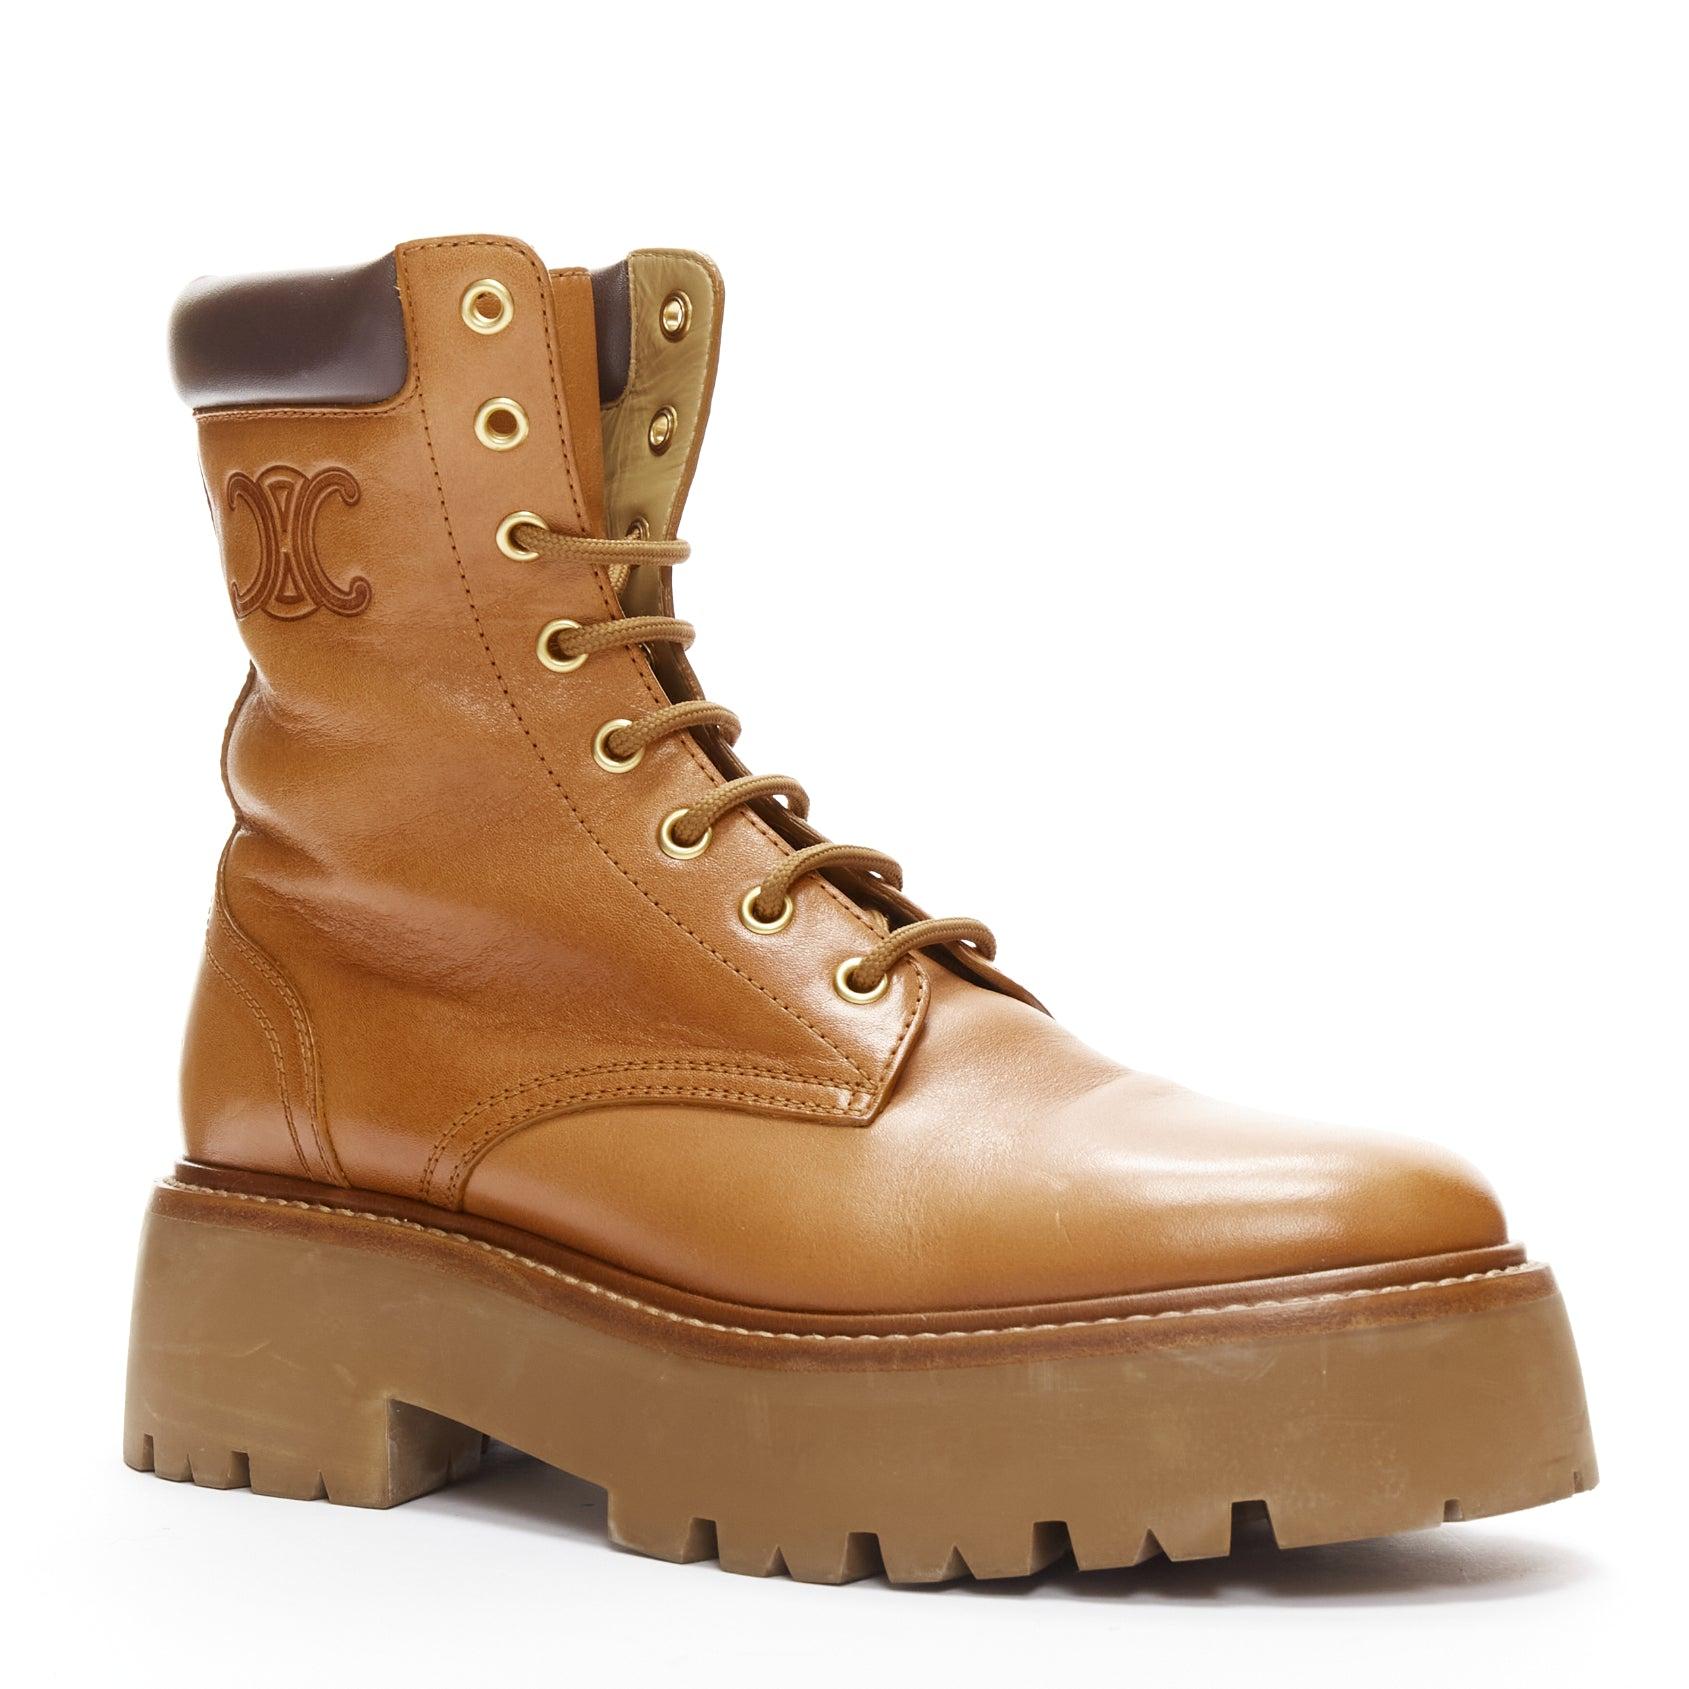 CELINE Triomphe Bulky logo tan calfskin lace up worker lug sole boots EU38
Reference: CNPG/A00041
Brand: Celine
Designer: Hedi Slimane
Collection: Triomphe Chunky - Runway
As seen on: Gwyneth Paltrow
Material: Leather
Color: Brown
Pattern: